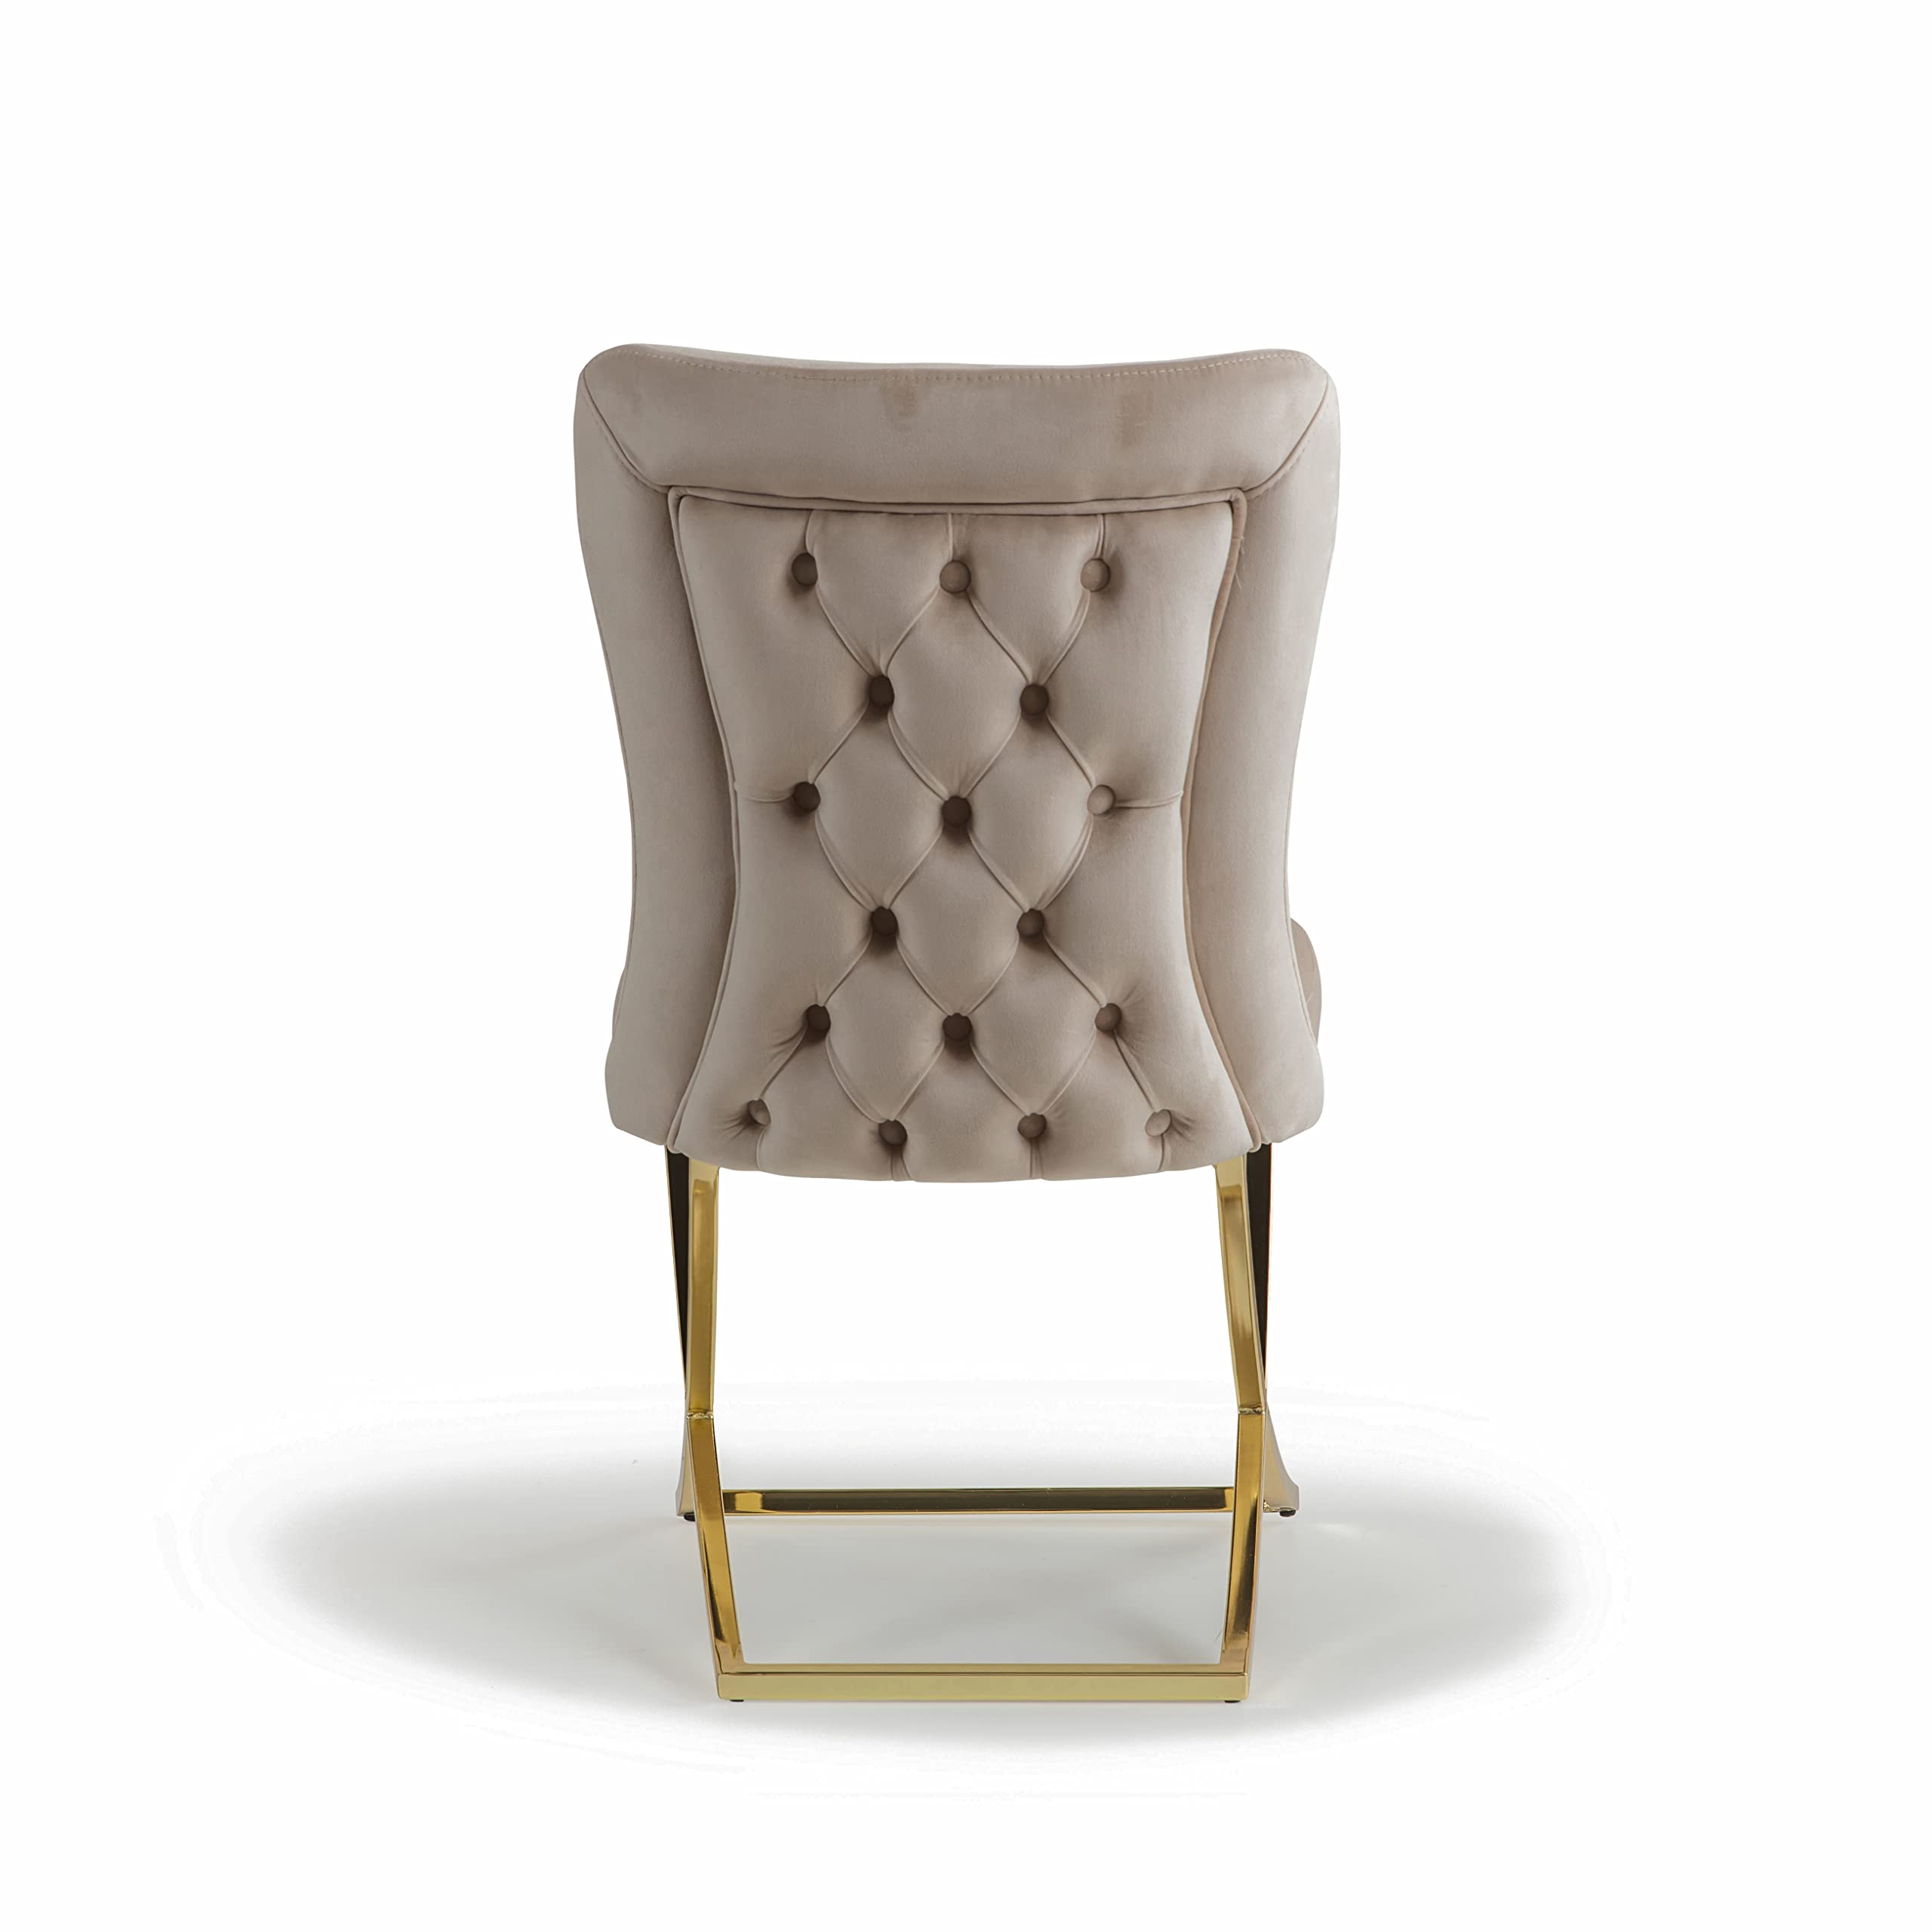 Royal Collection Dining Chair, Set of 4, Microfiber, Beige/Gold Legs